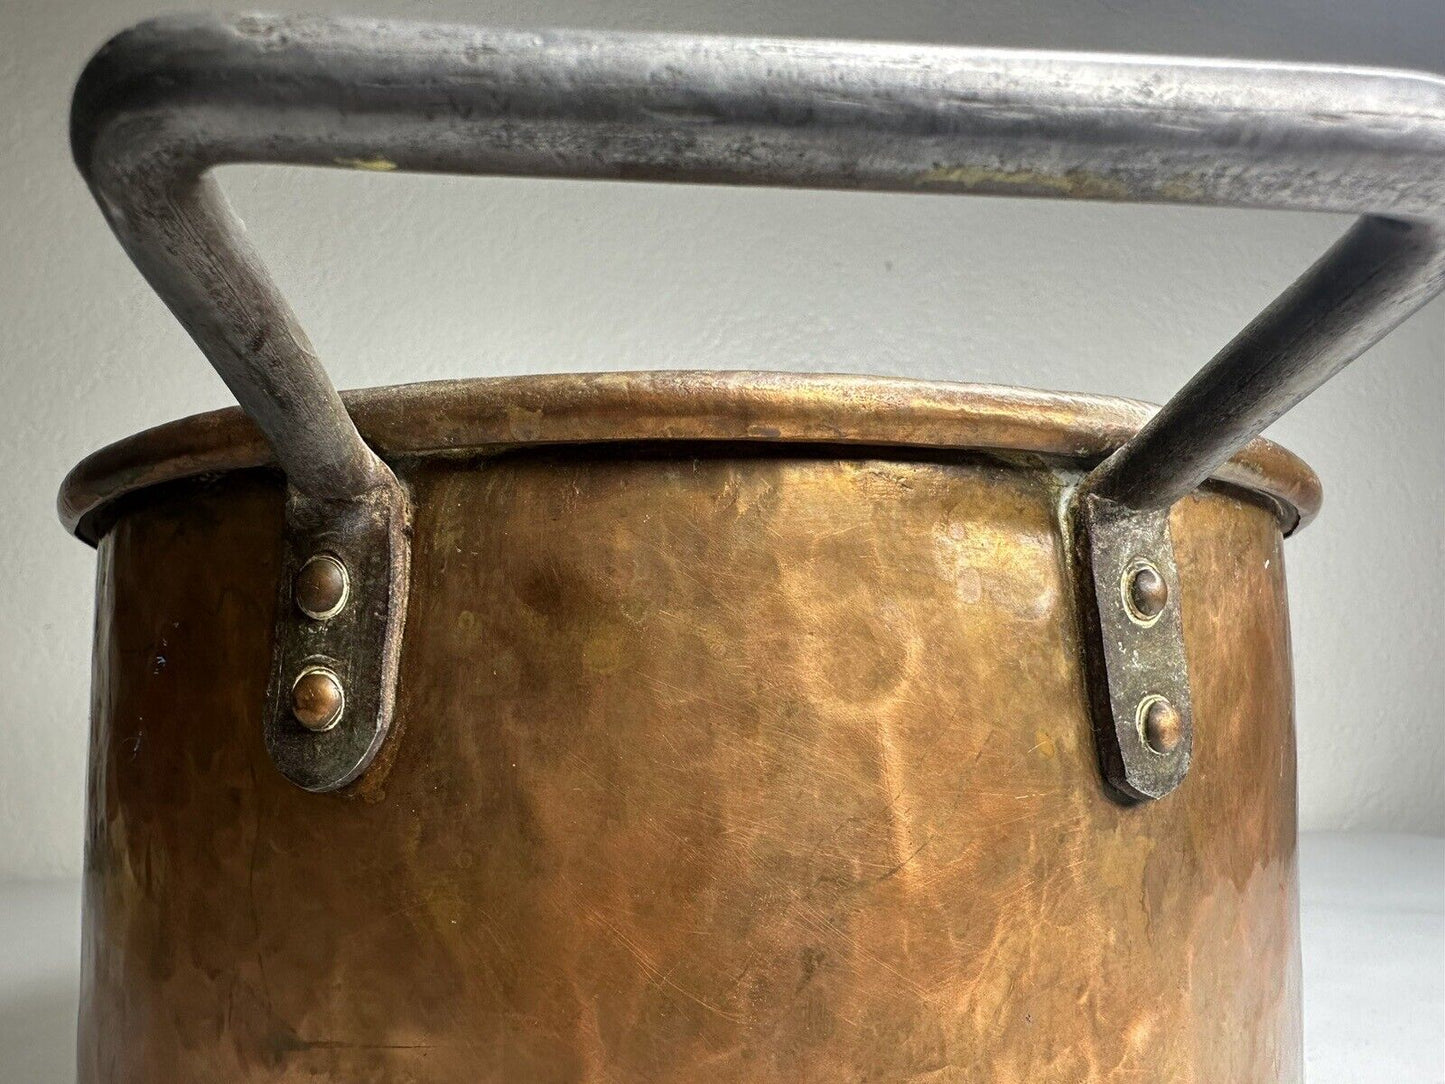 Antique Early 1800s Hand-Hammered French Copper Stew Pot with Dovetail Joints - 10.5" Vintage Cookware - TreasuTiques